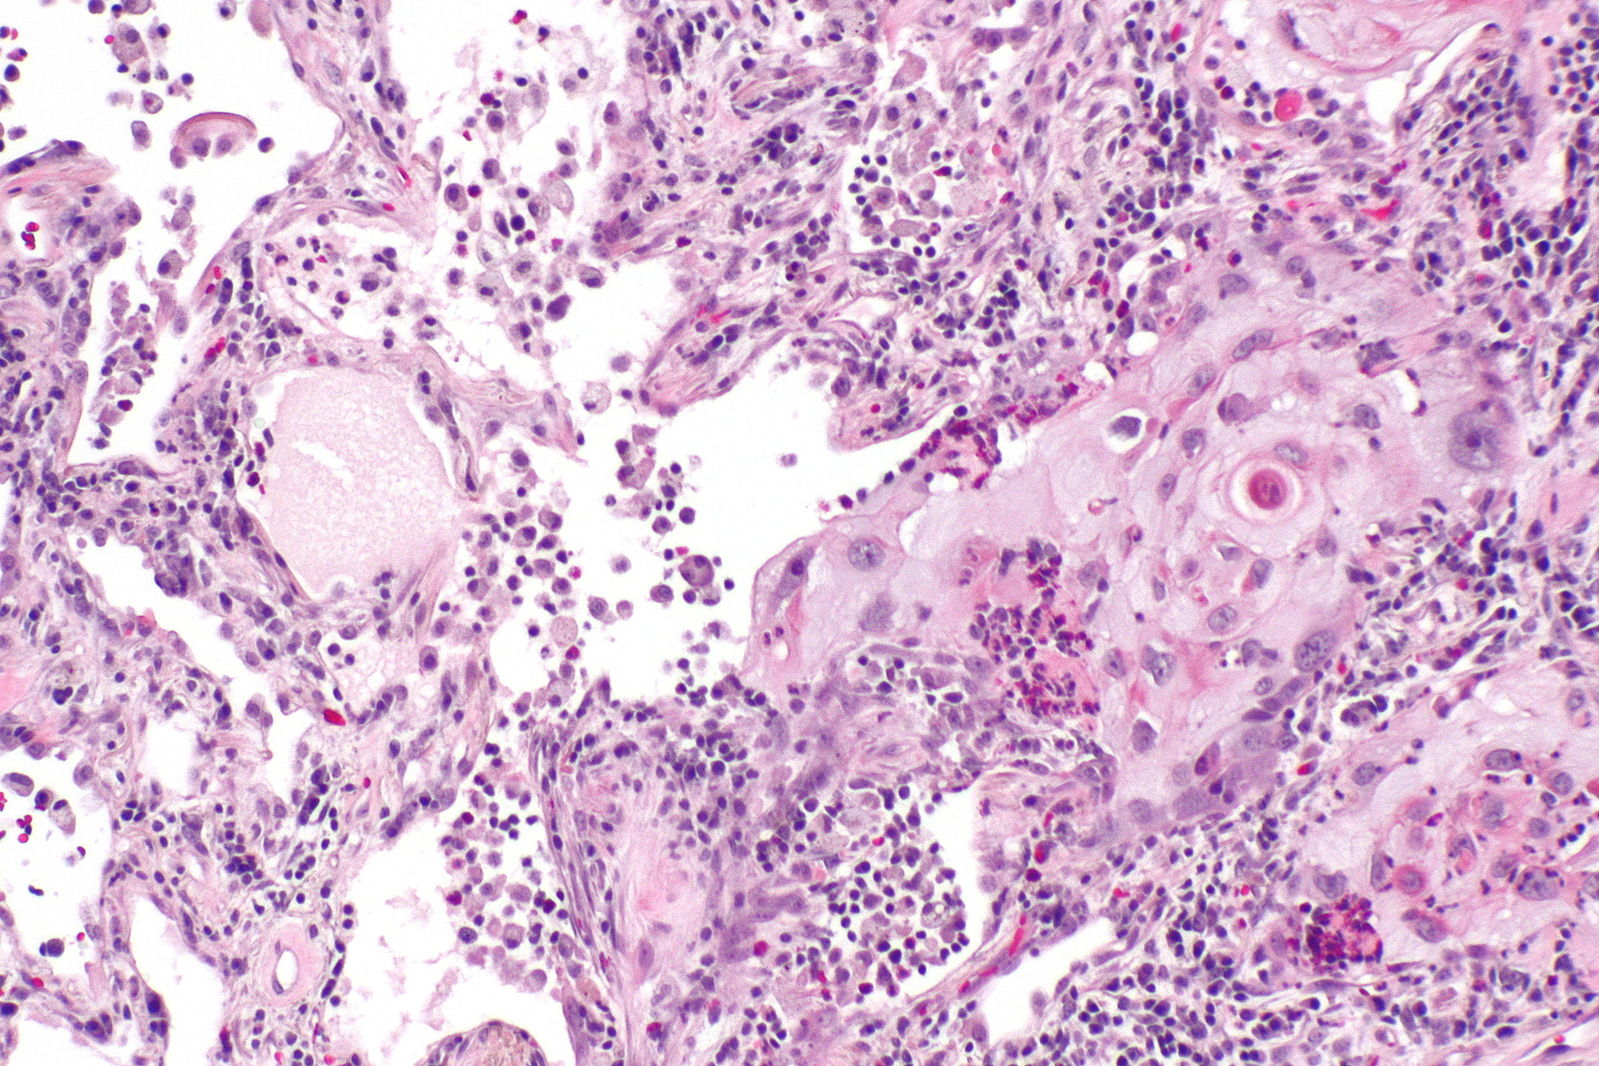 Micropathology: Squamous cell carcinoma of the lung. H&E stain